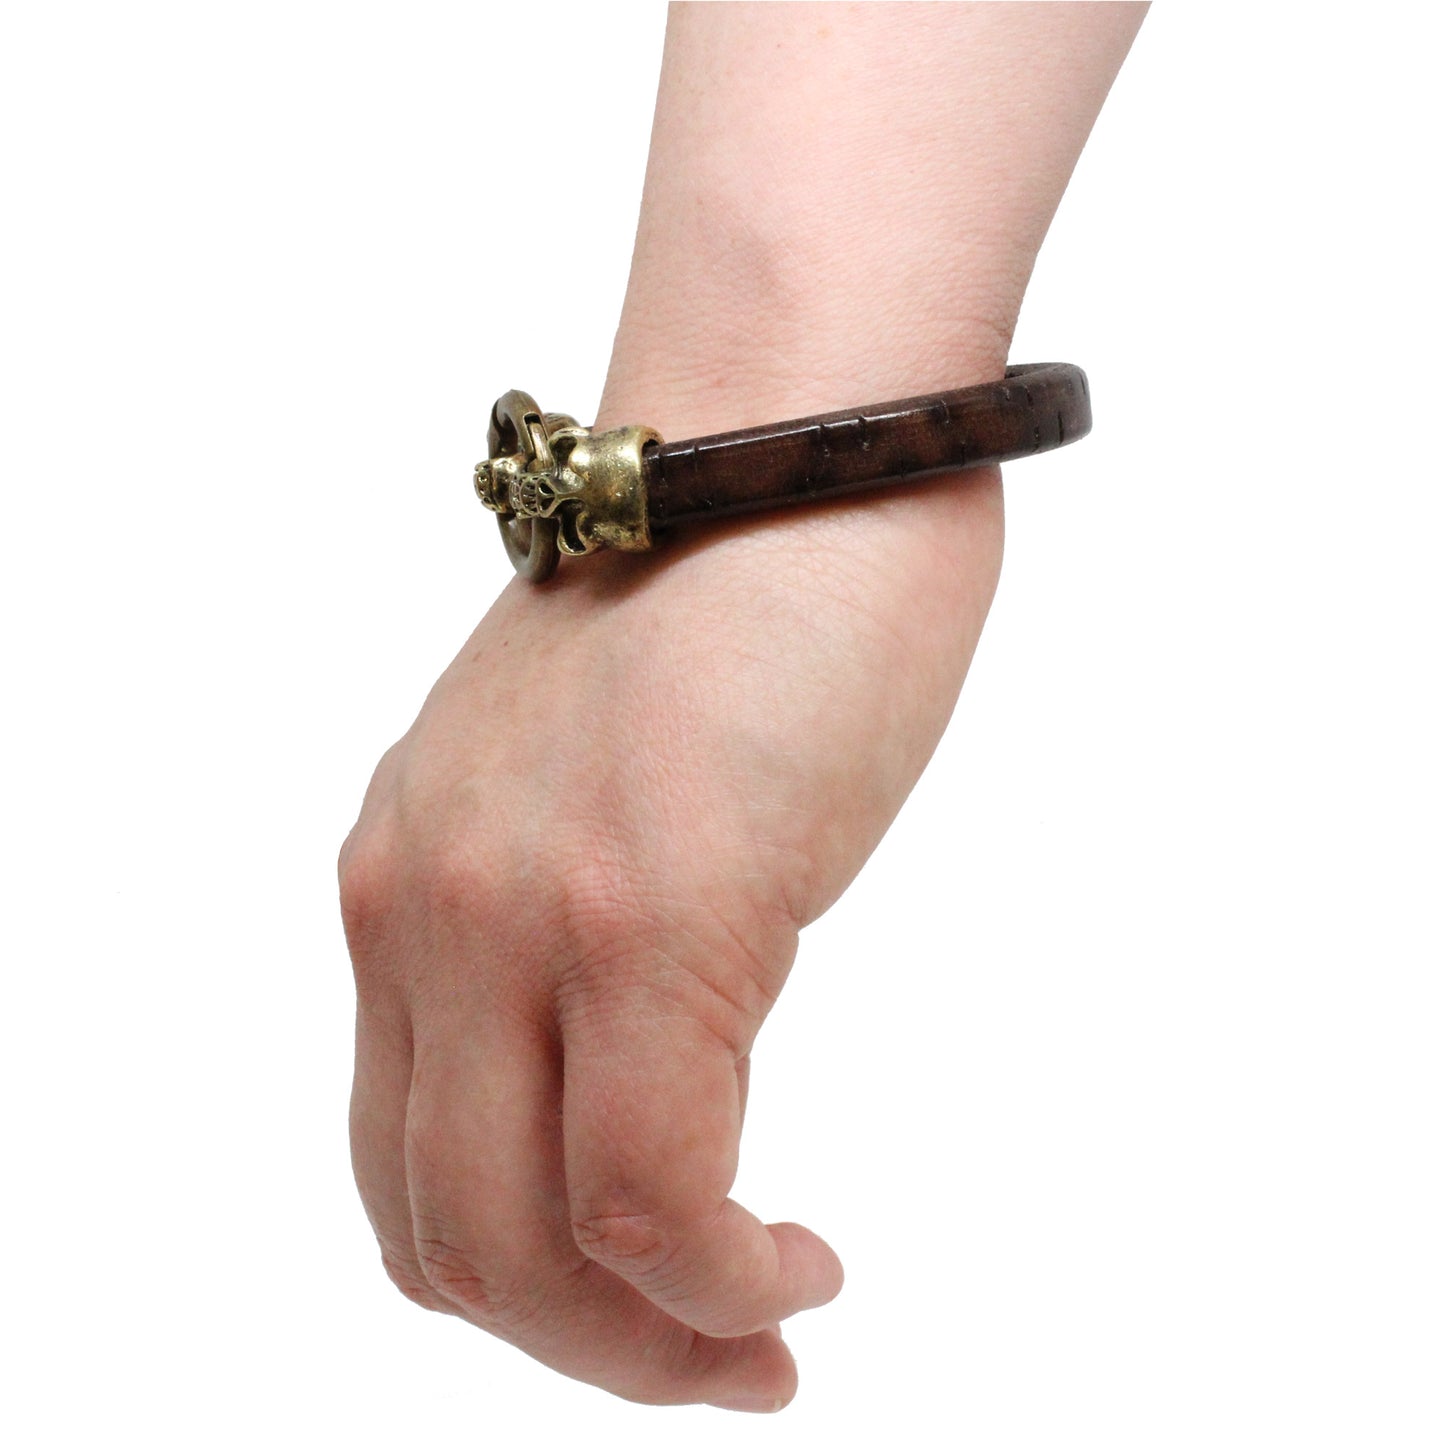 Skull and Ring Bracelet / 7.5 Inch wrist size / large antique bronze double skull clasp / brown bark leather cord